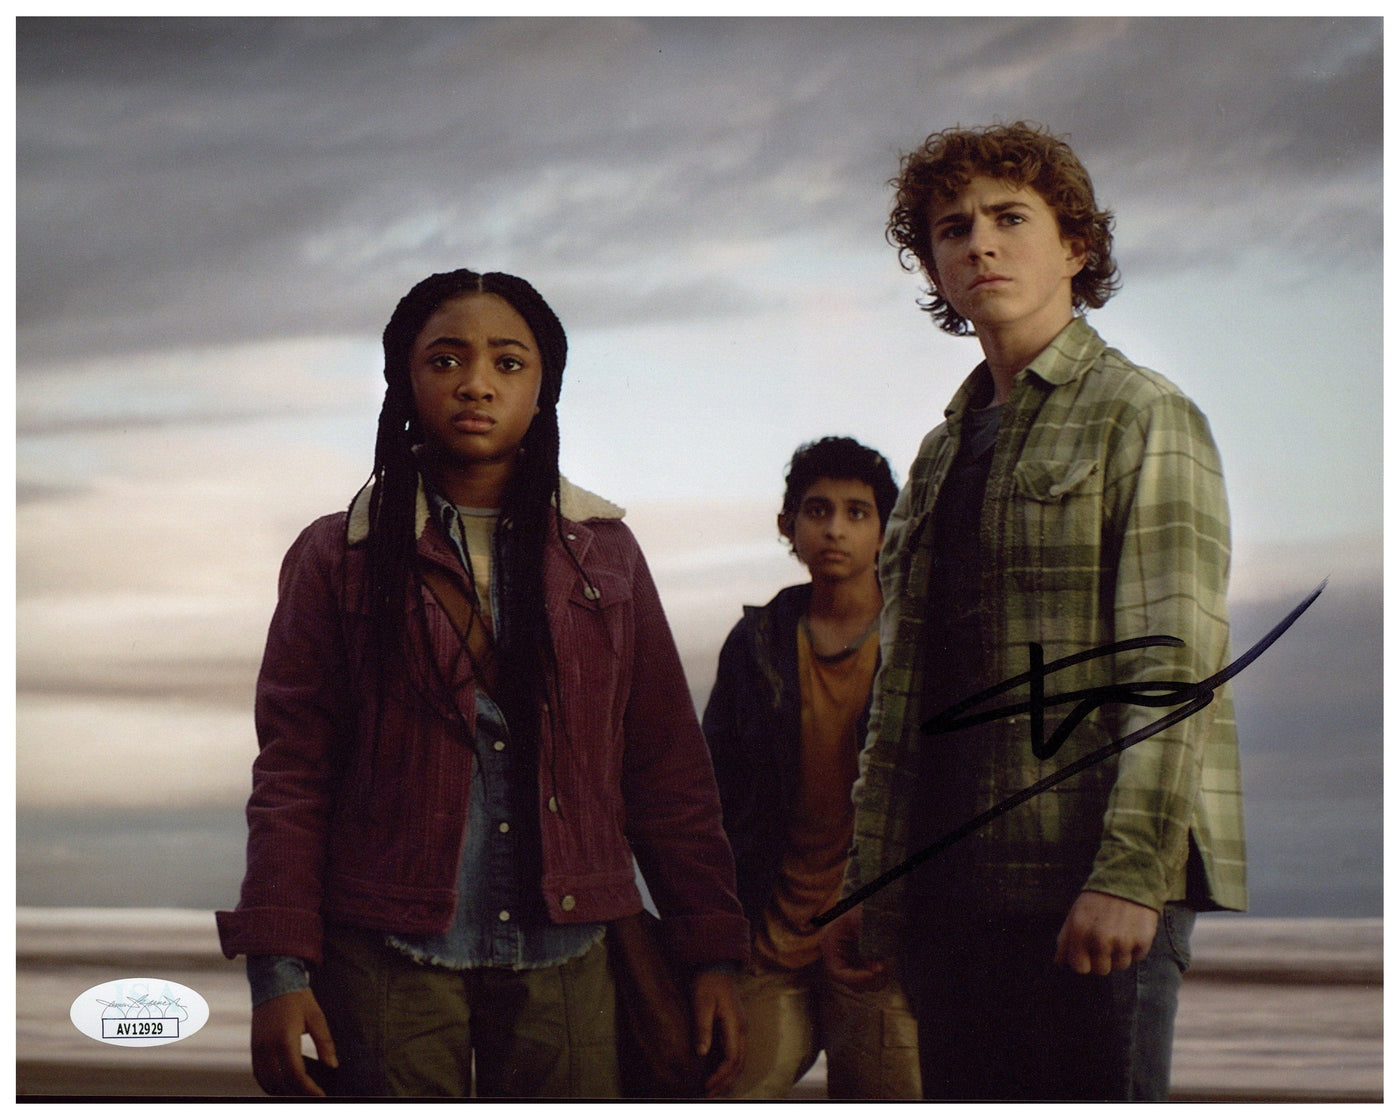 Walker Scobell Signed 8x10 Photo Percy Jackson and the Olympians Autographed JSA #2